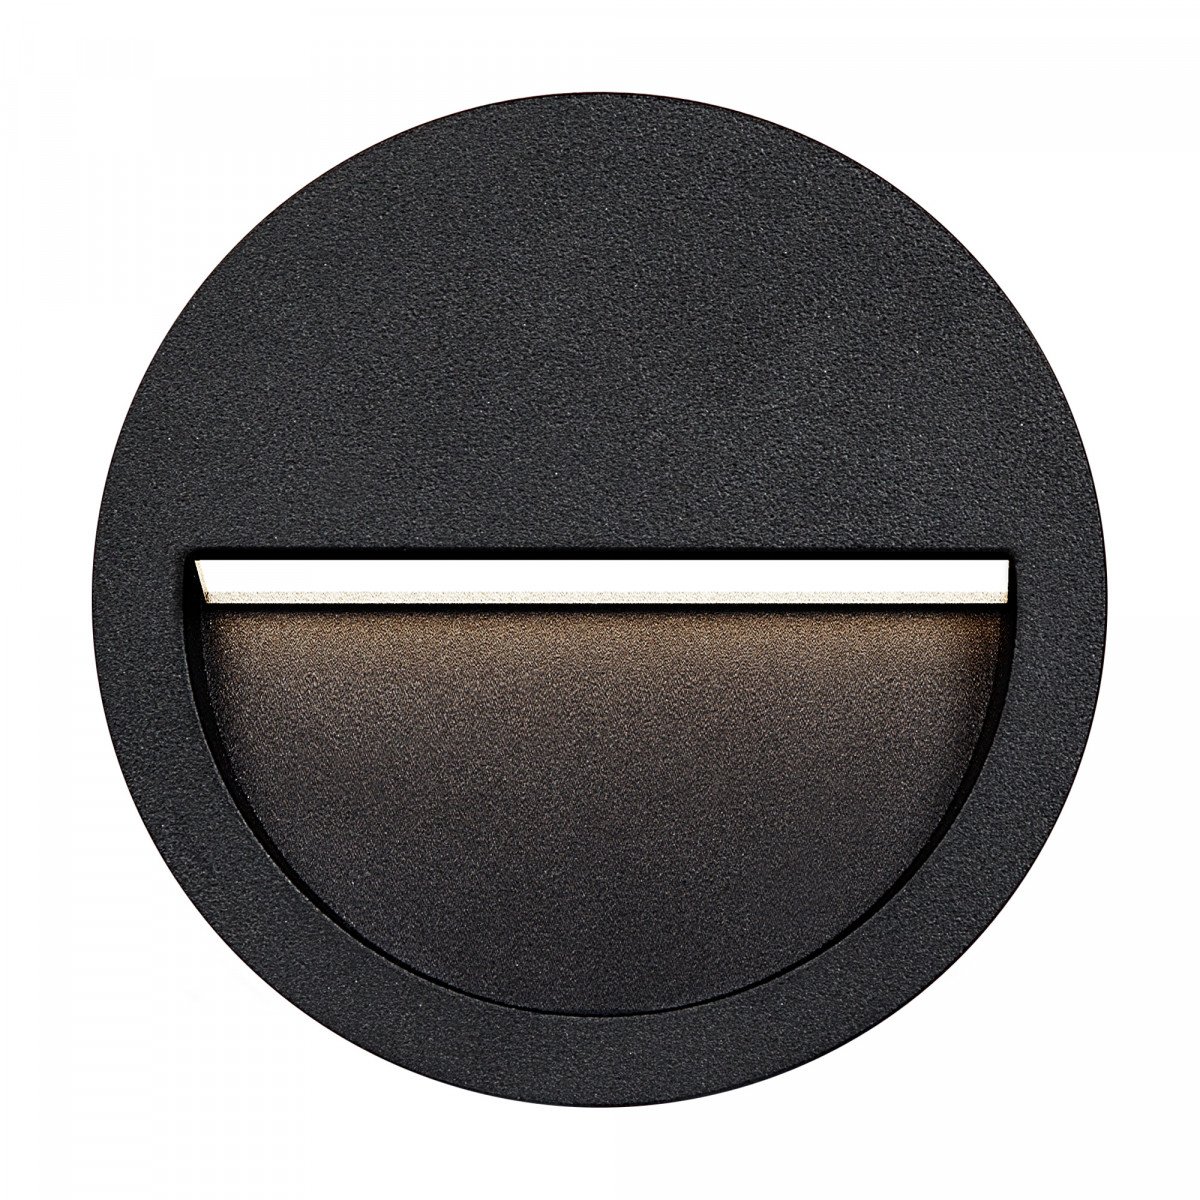 LED recessed wall light Section 2